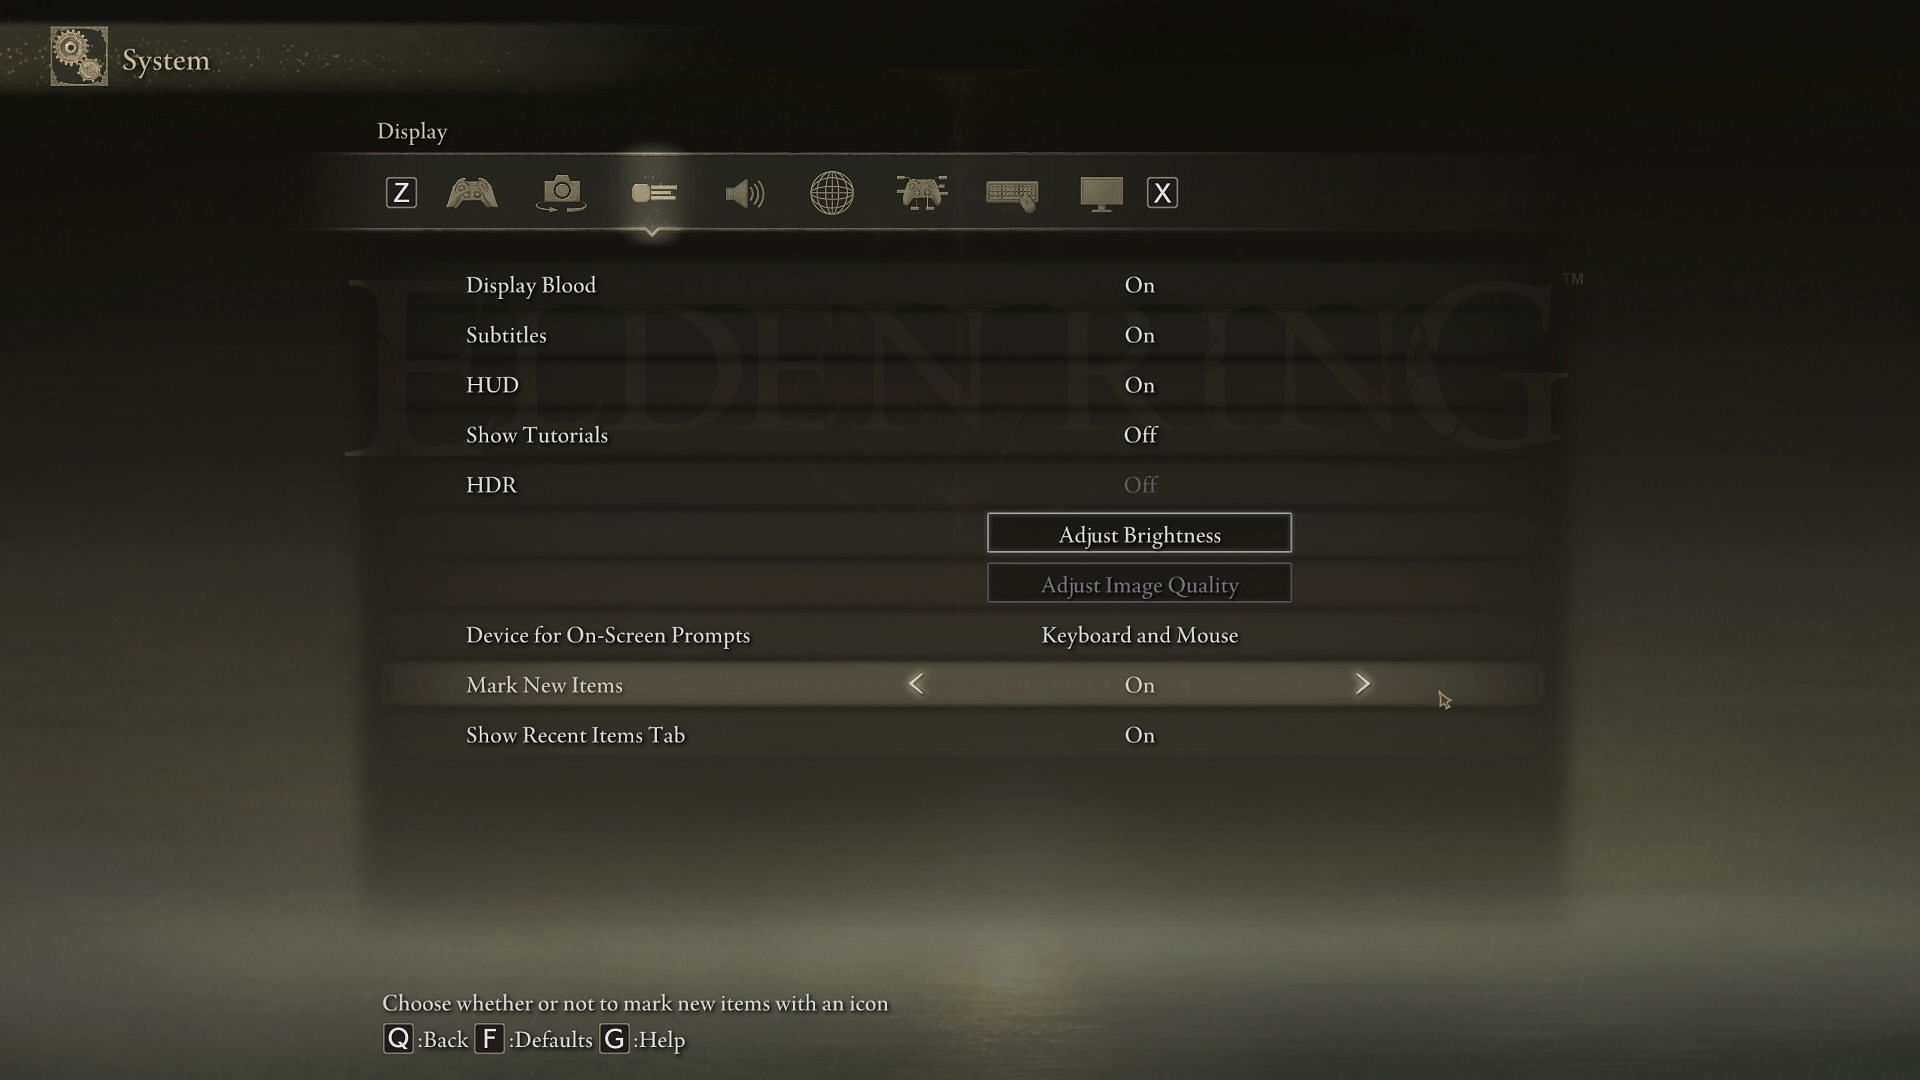 Enable the Mark New Items &amp; Show Recent Items Tab options from the System settings. (Image via FromSoftware)